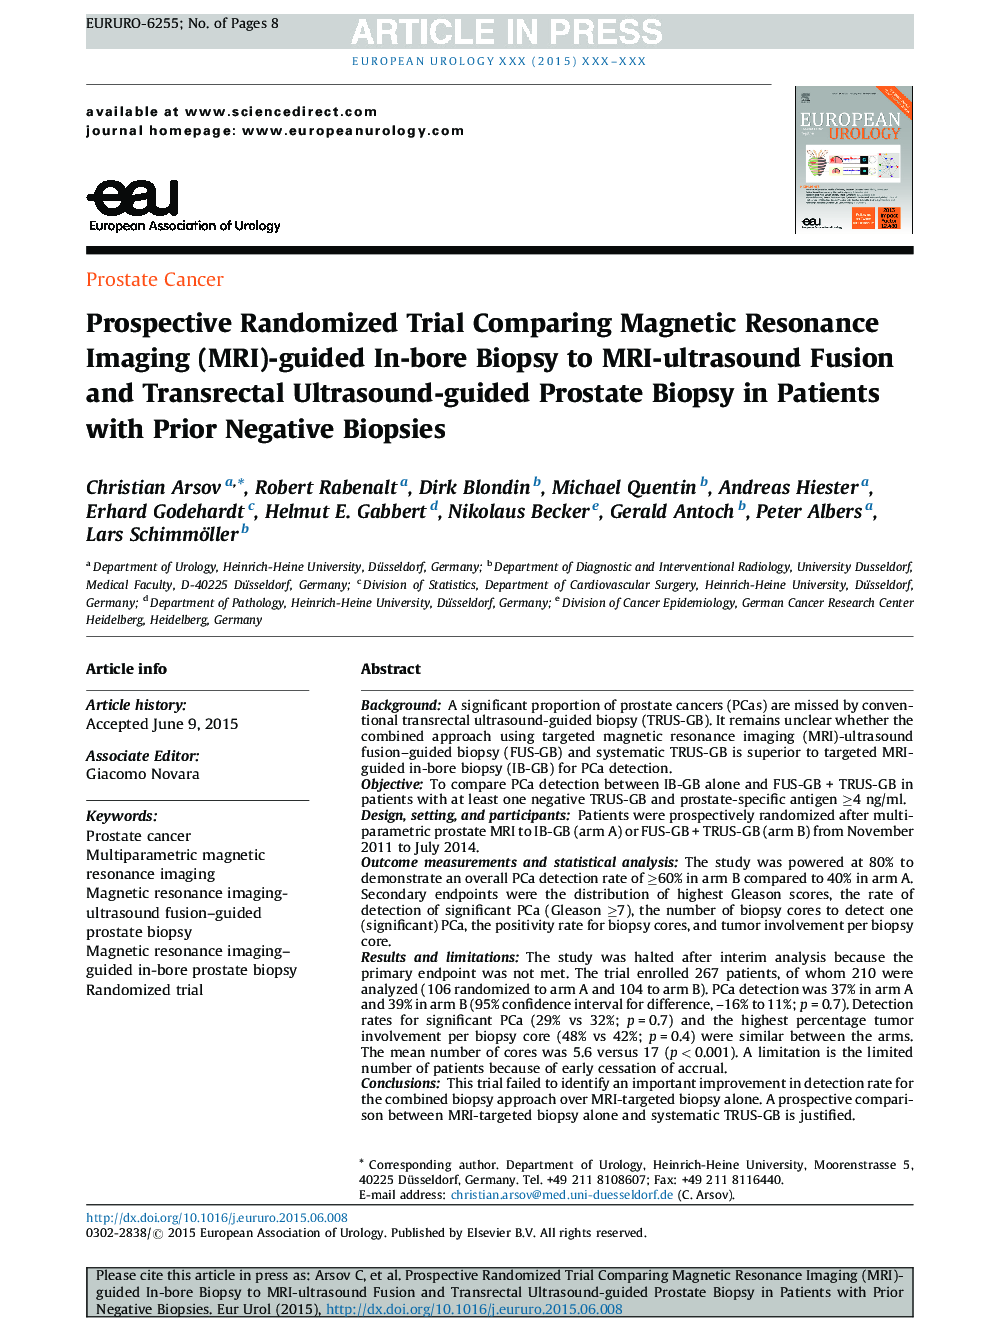 Prospective Randomized Trial Comparing Magnetic Resonance Imaging (MRI)-guided In-bore Biopsy to MRI-ultrasound Fusion and Transrectal Ultrasound-guided Prostate Biopsy in Patients with Prior Negative Biopsies